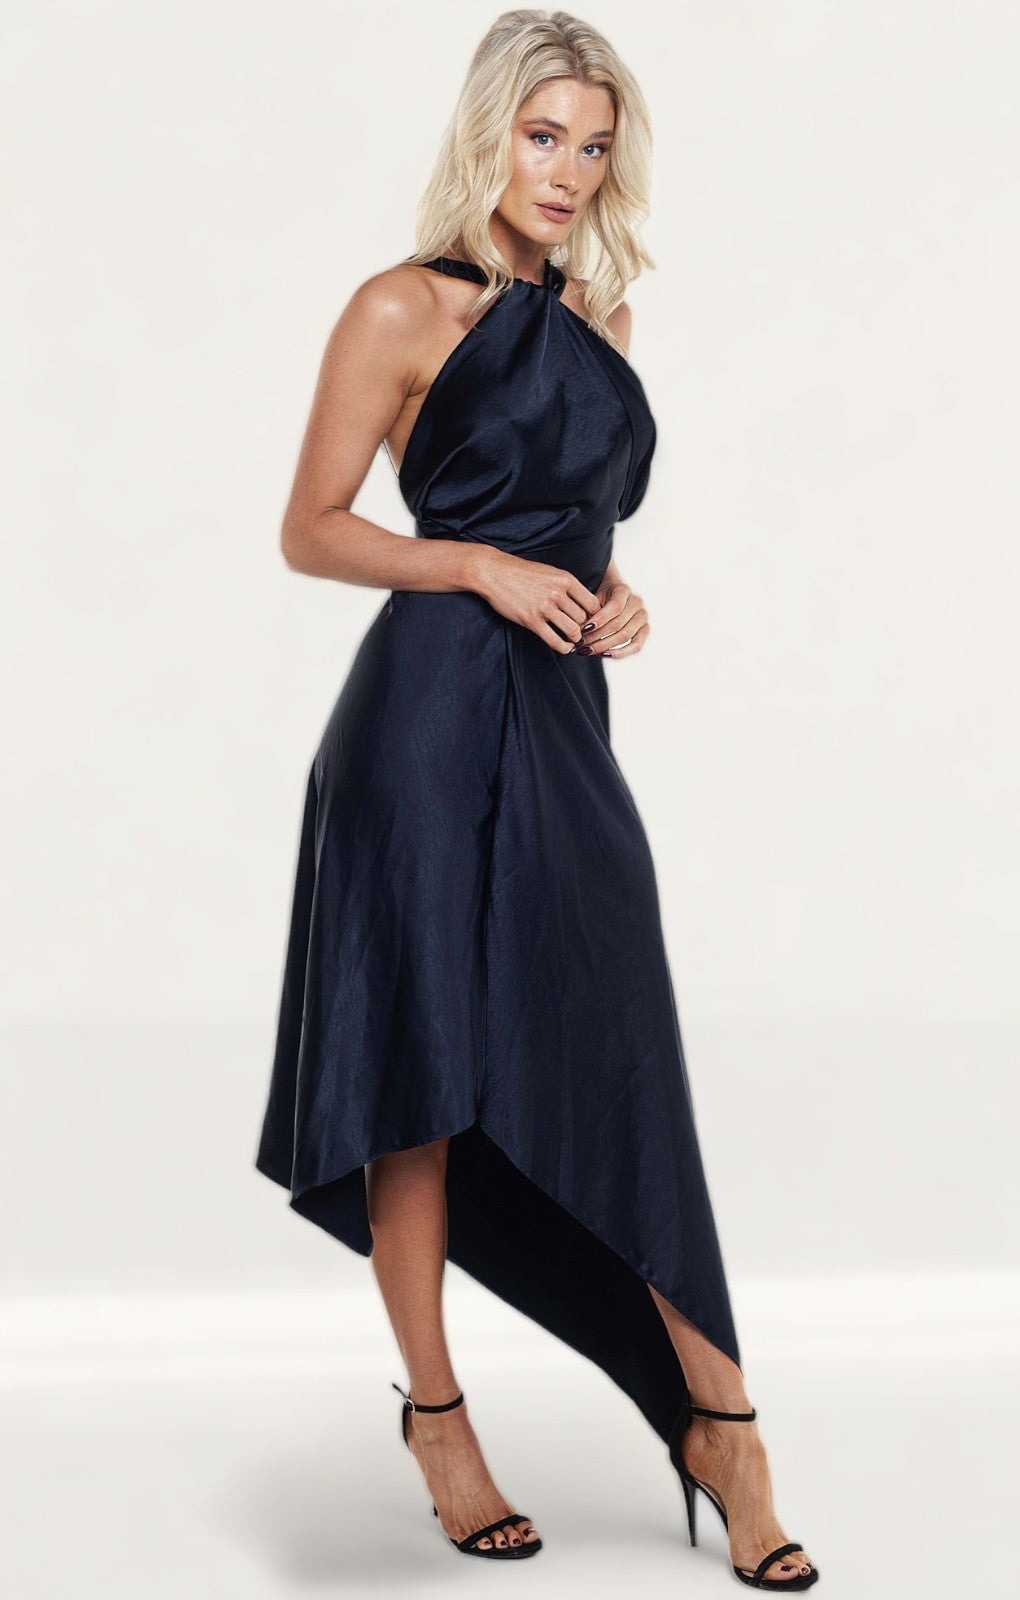 One Fell Swoop Audrey Navy Dress product image